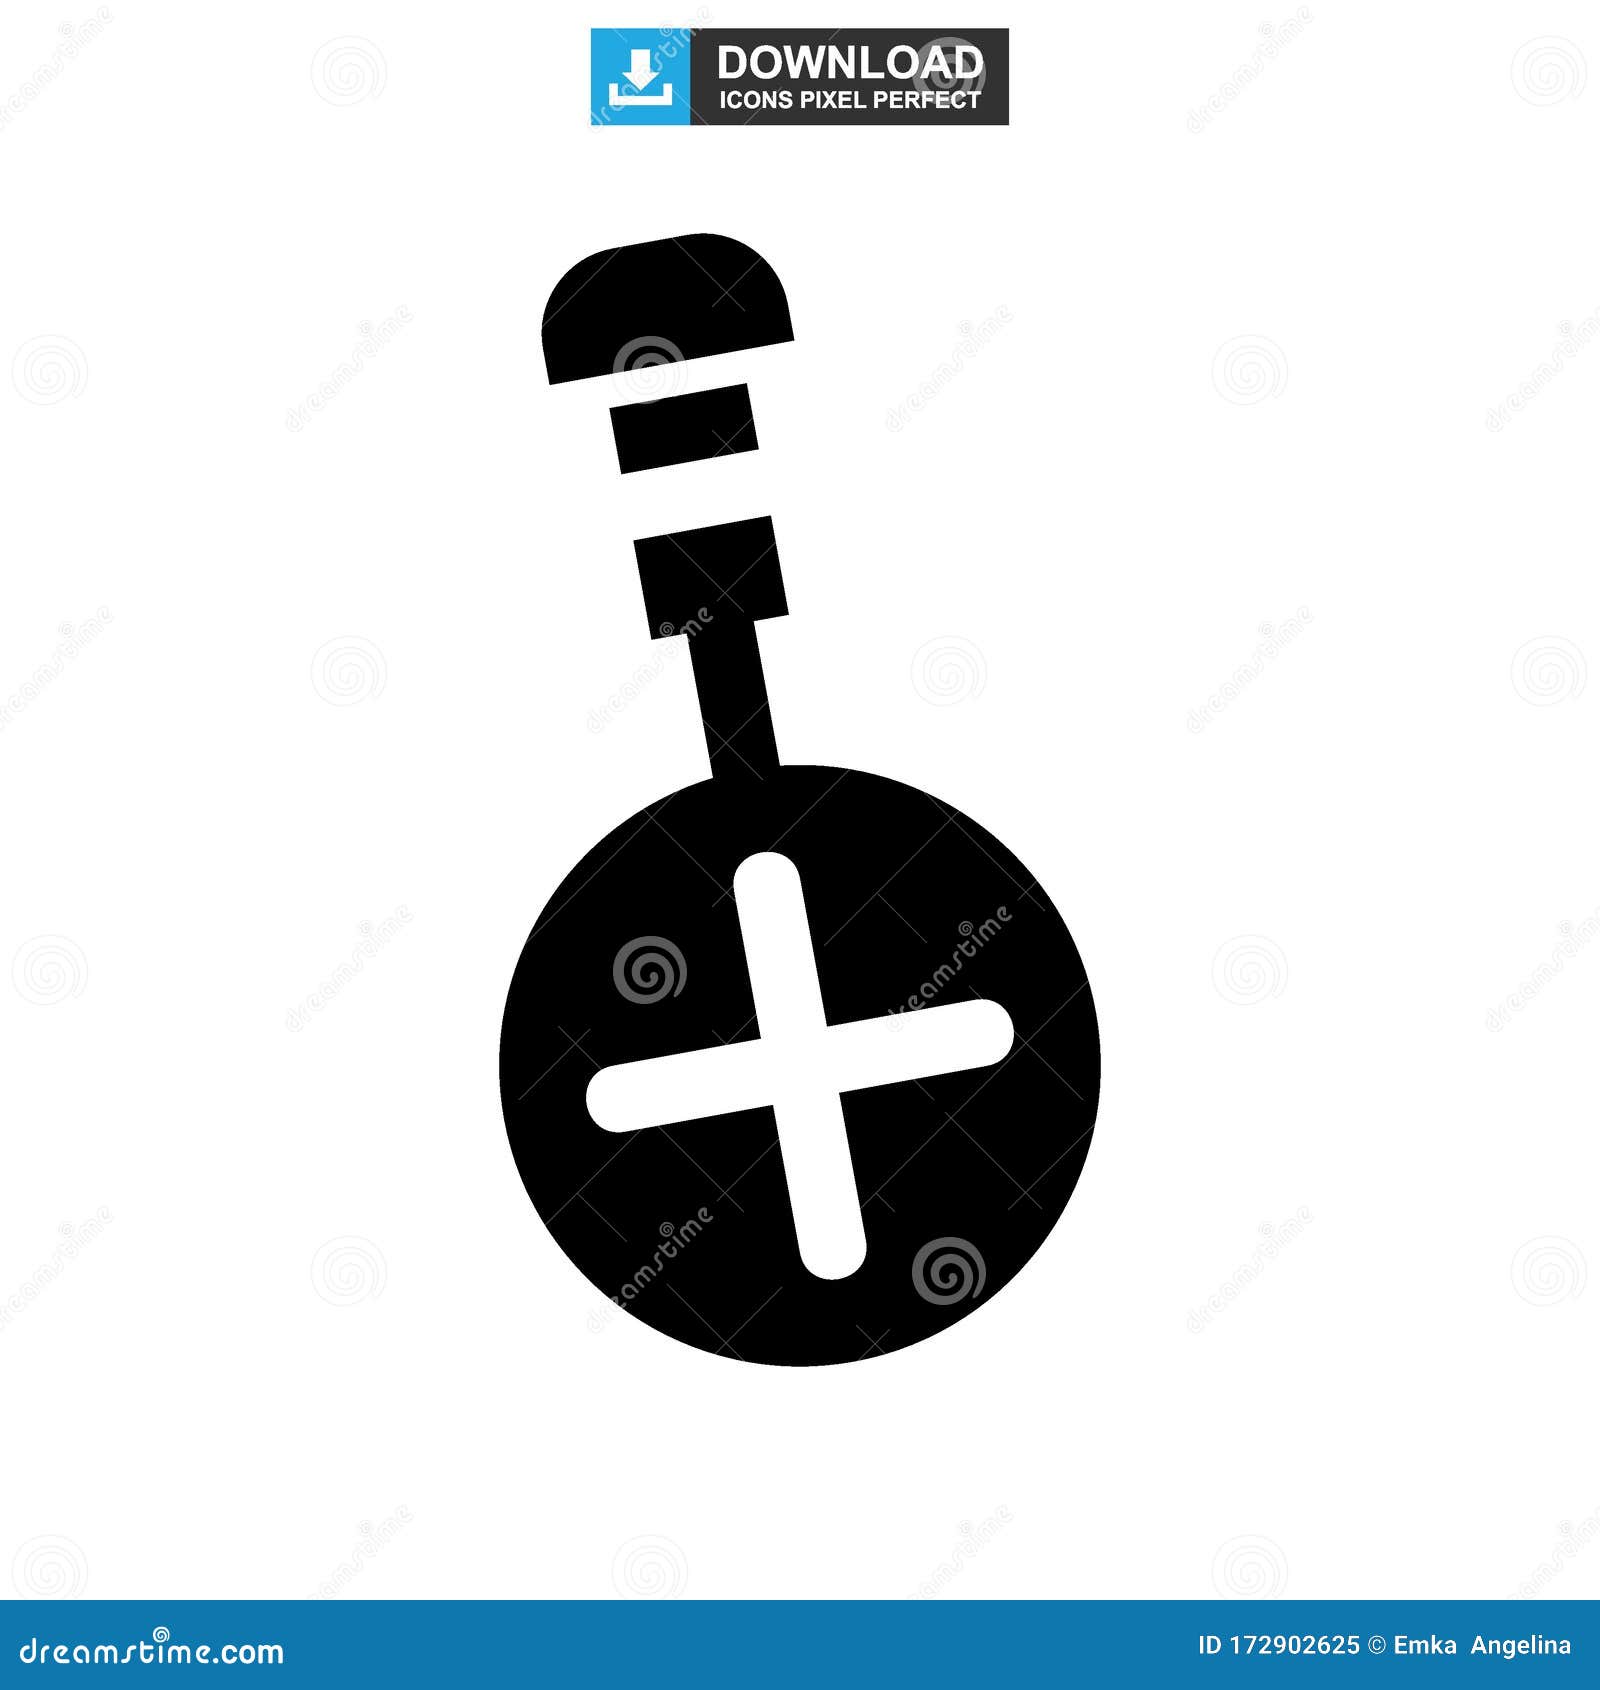 Download Zoom In Icon Or Logo Isolated Sign Symbol Vector ...